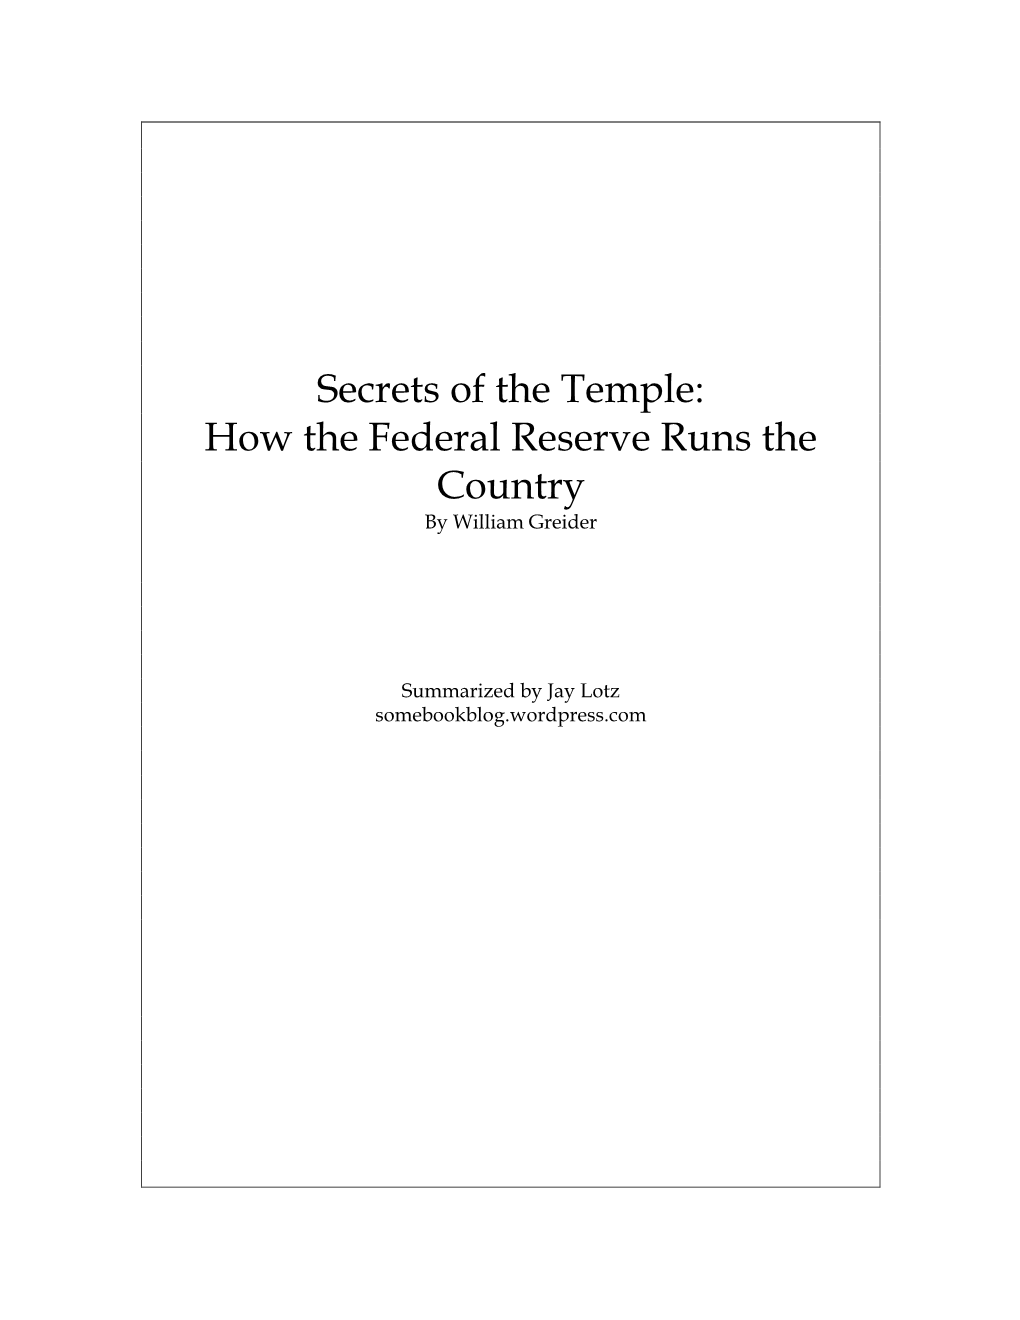 Secrets of the Temple: How the Federal Reserve Runs the Country by William Greider